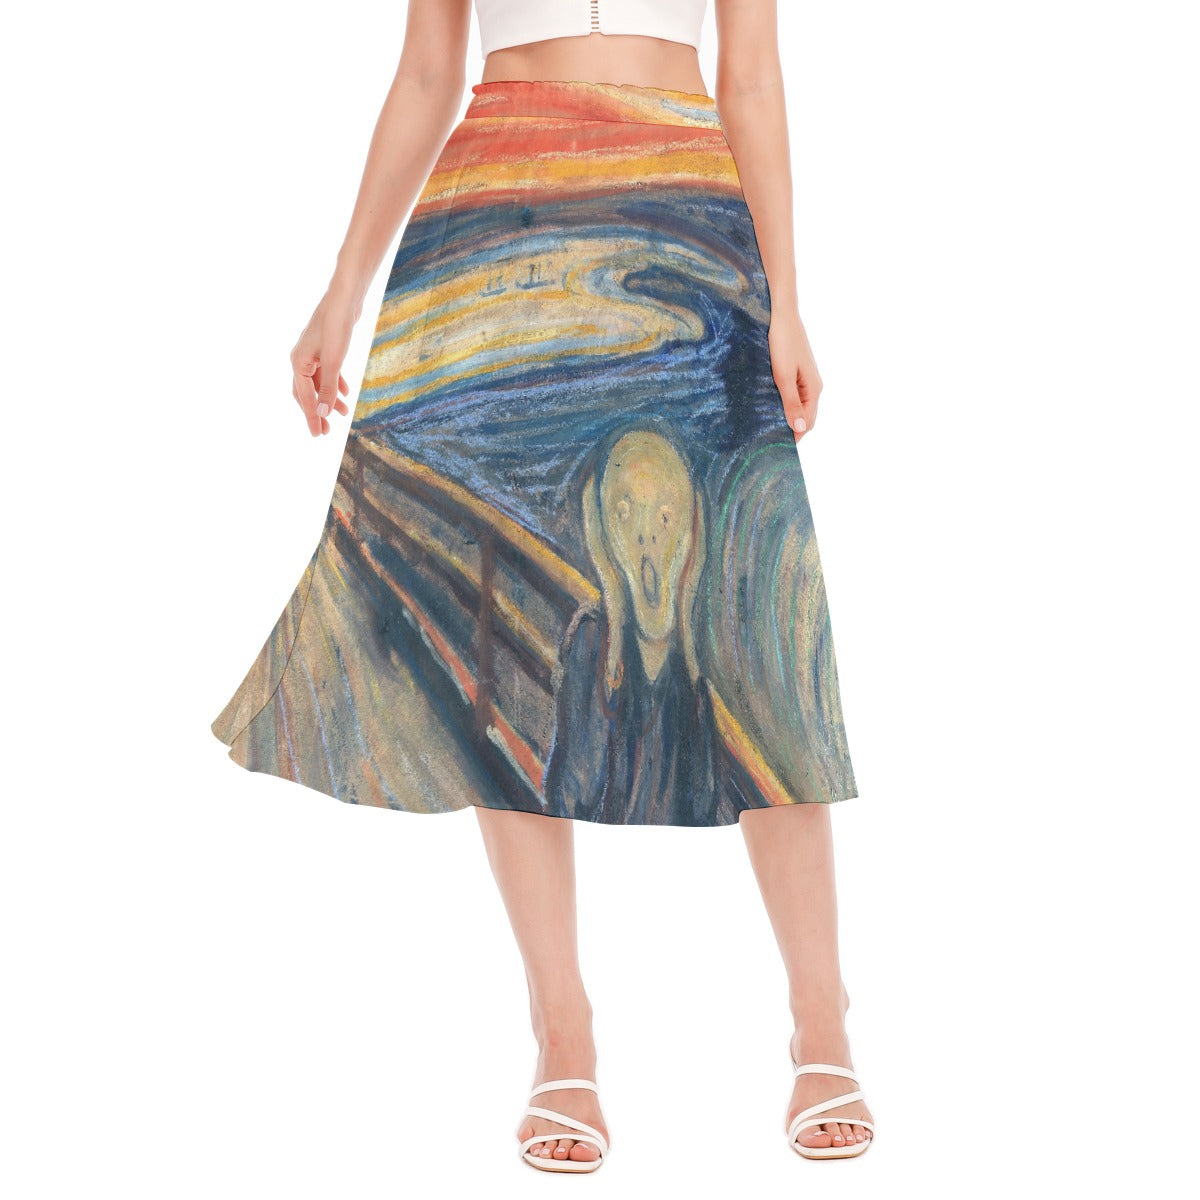 Ethereal Chiffon Skirt Inspired by The Scream